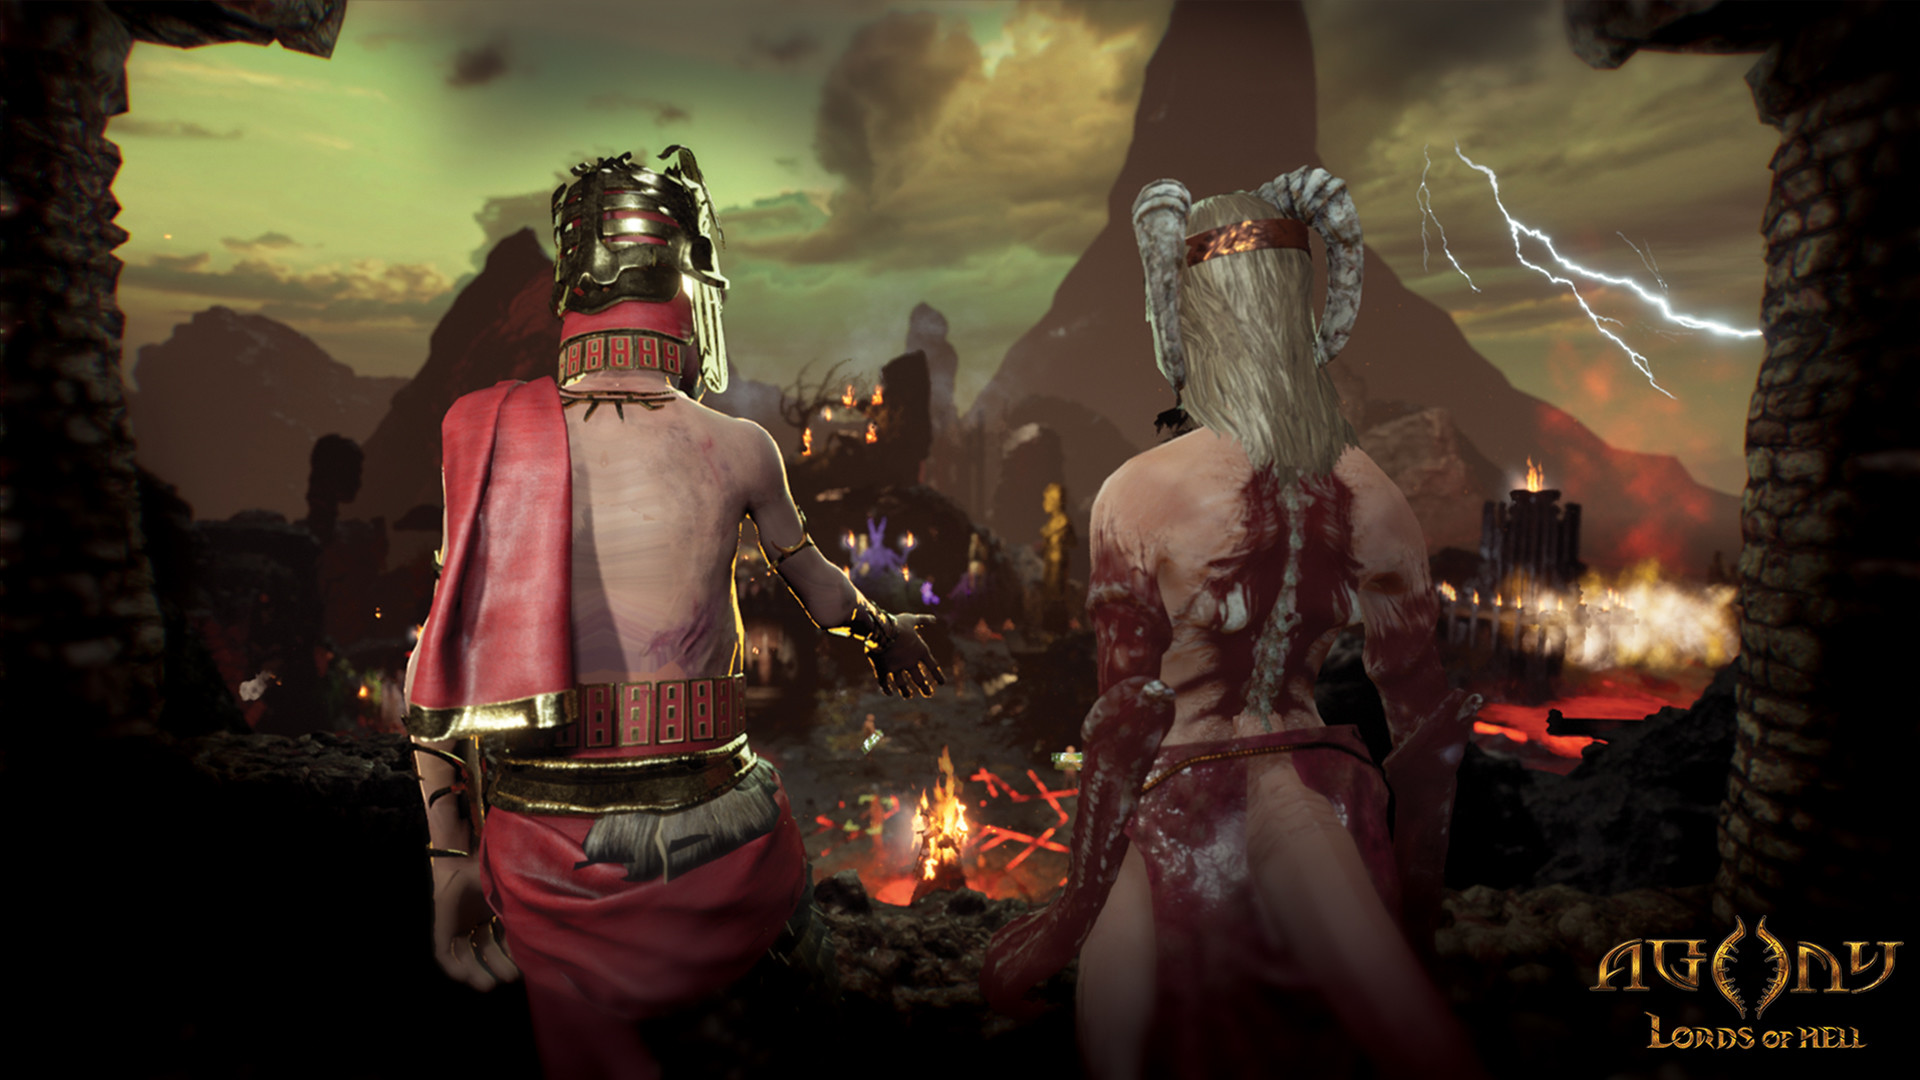 Agony: Lords of Hell on Steam